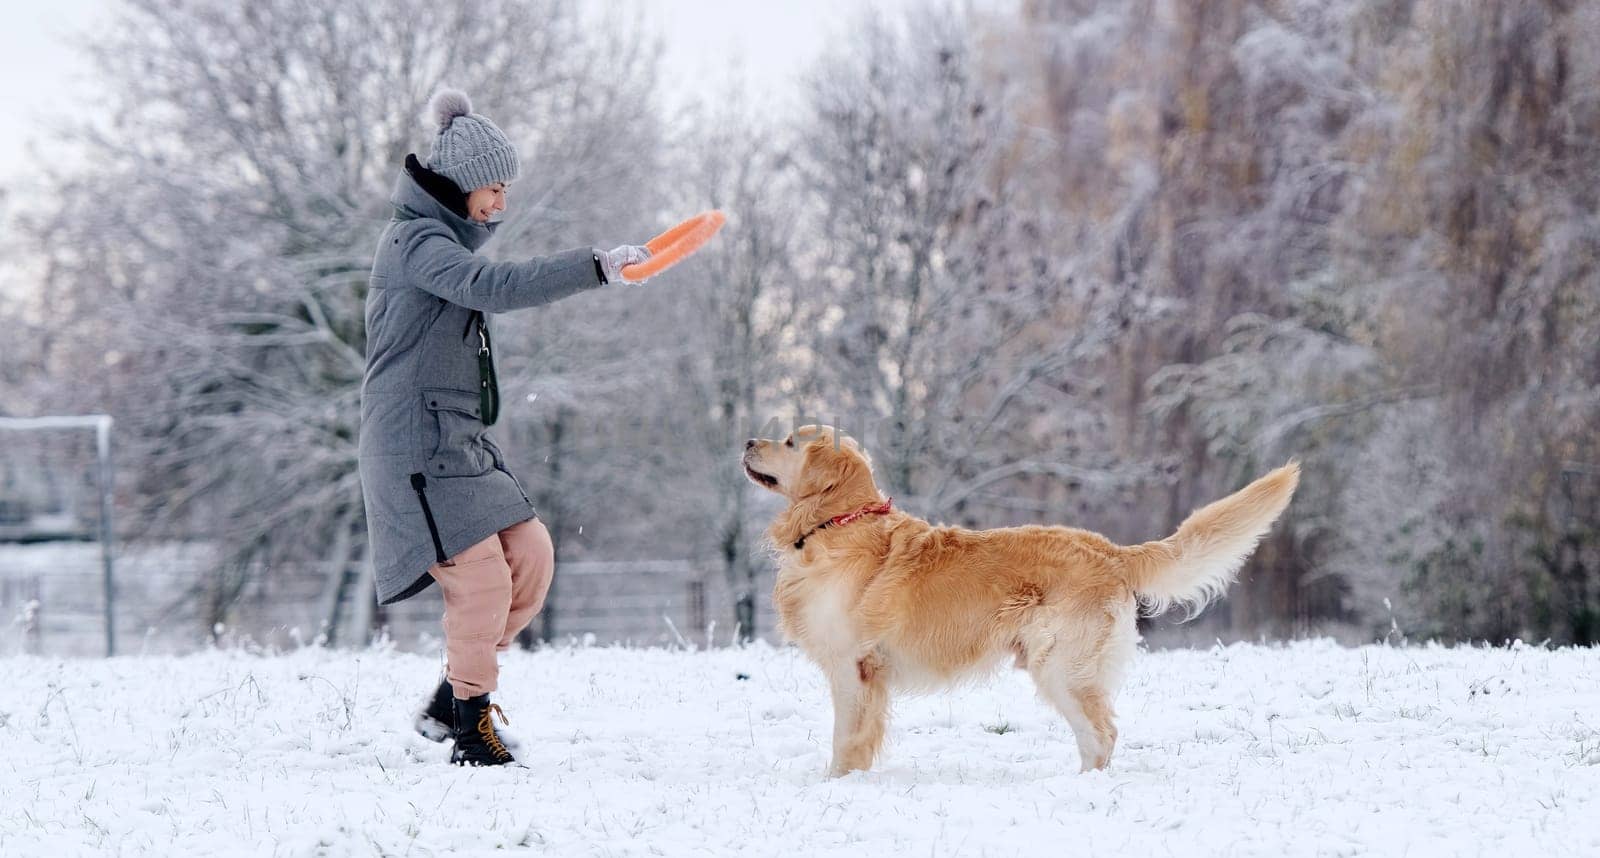 Girl Throwing Ring Toy To Adorable Golden Retriever Dog On A Snow Field In Winter